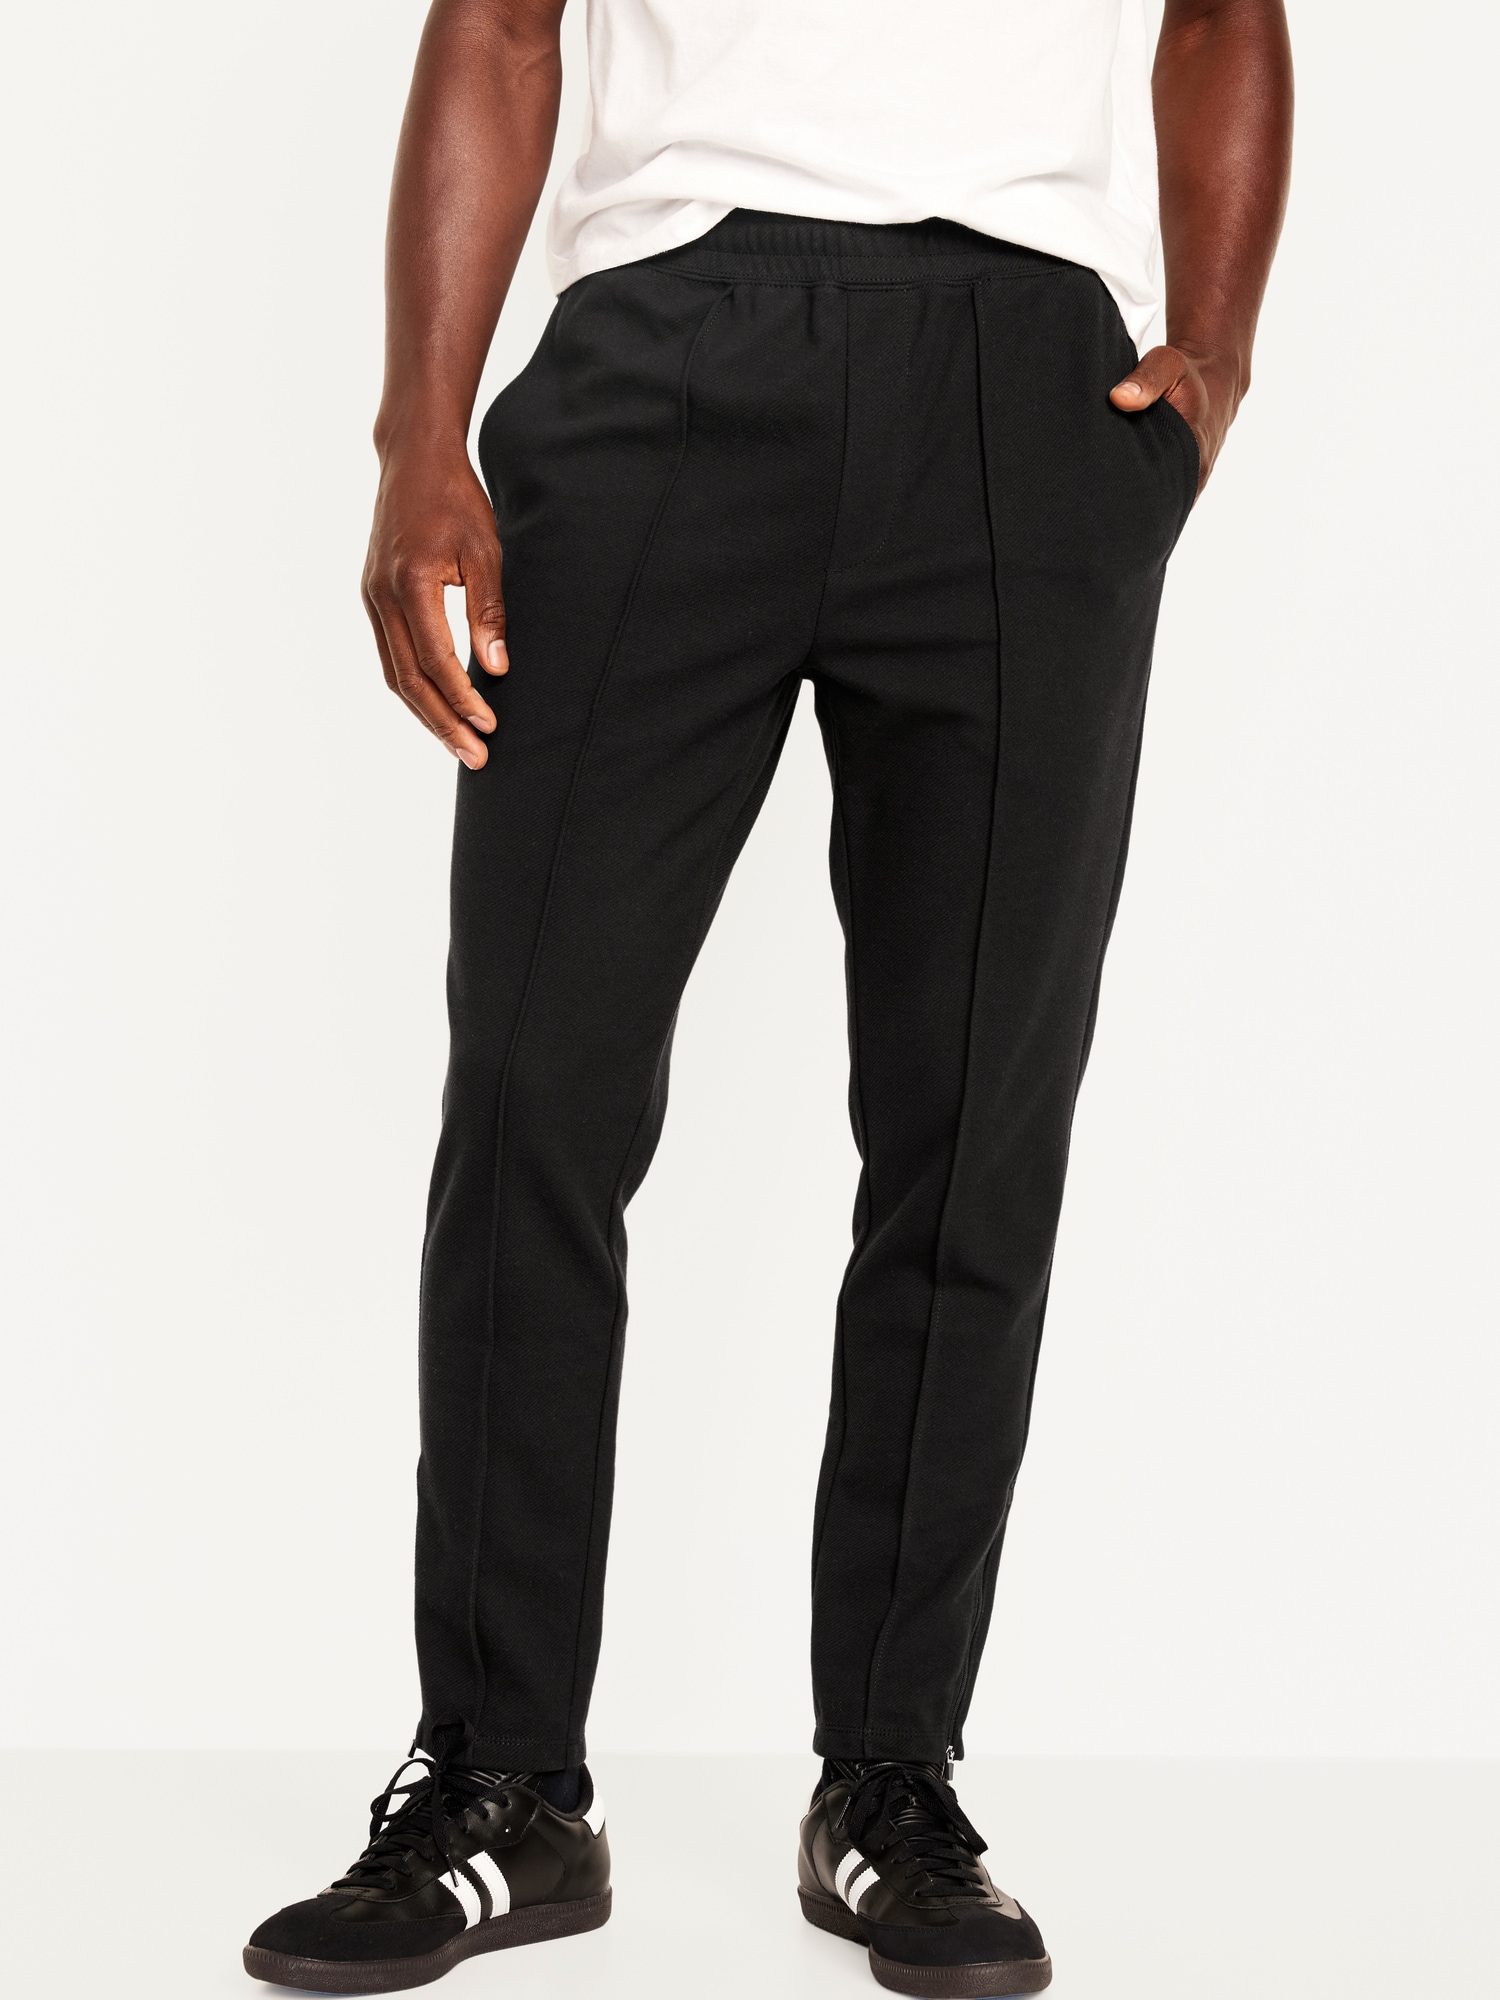 Tapered Go Workout Pants For Men, Old Navy Athletic Pants